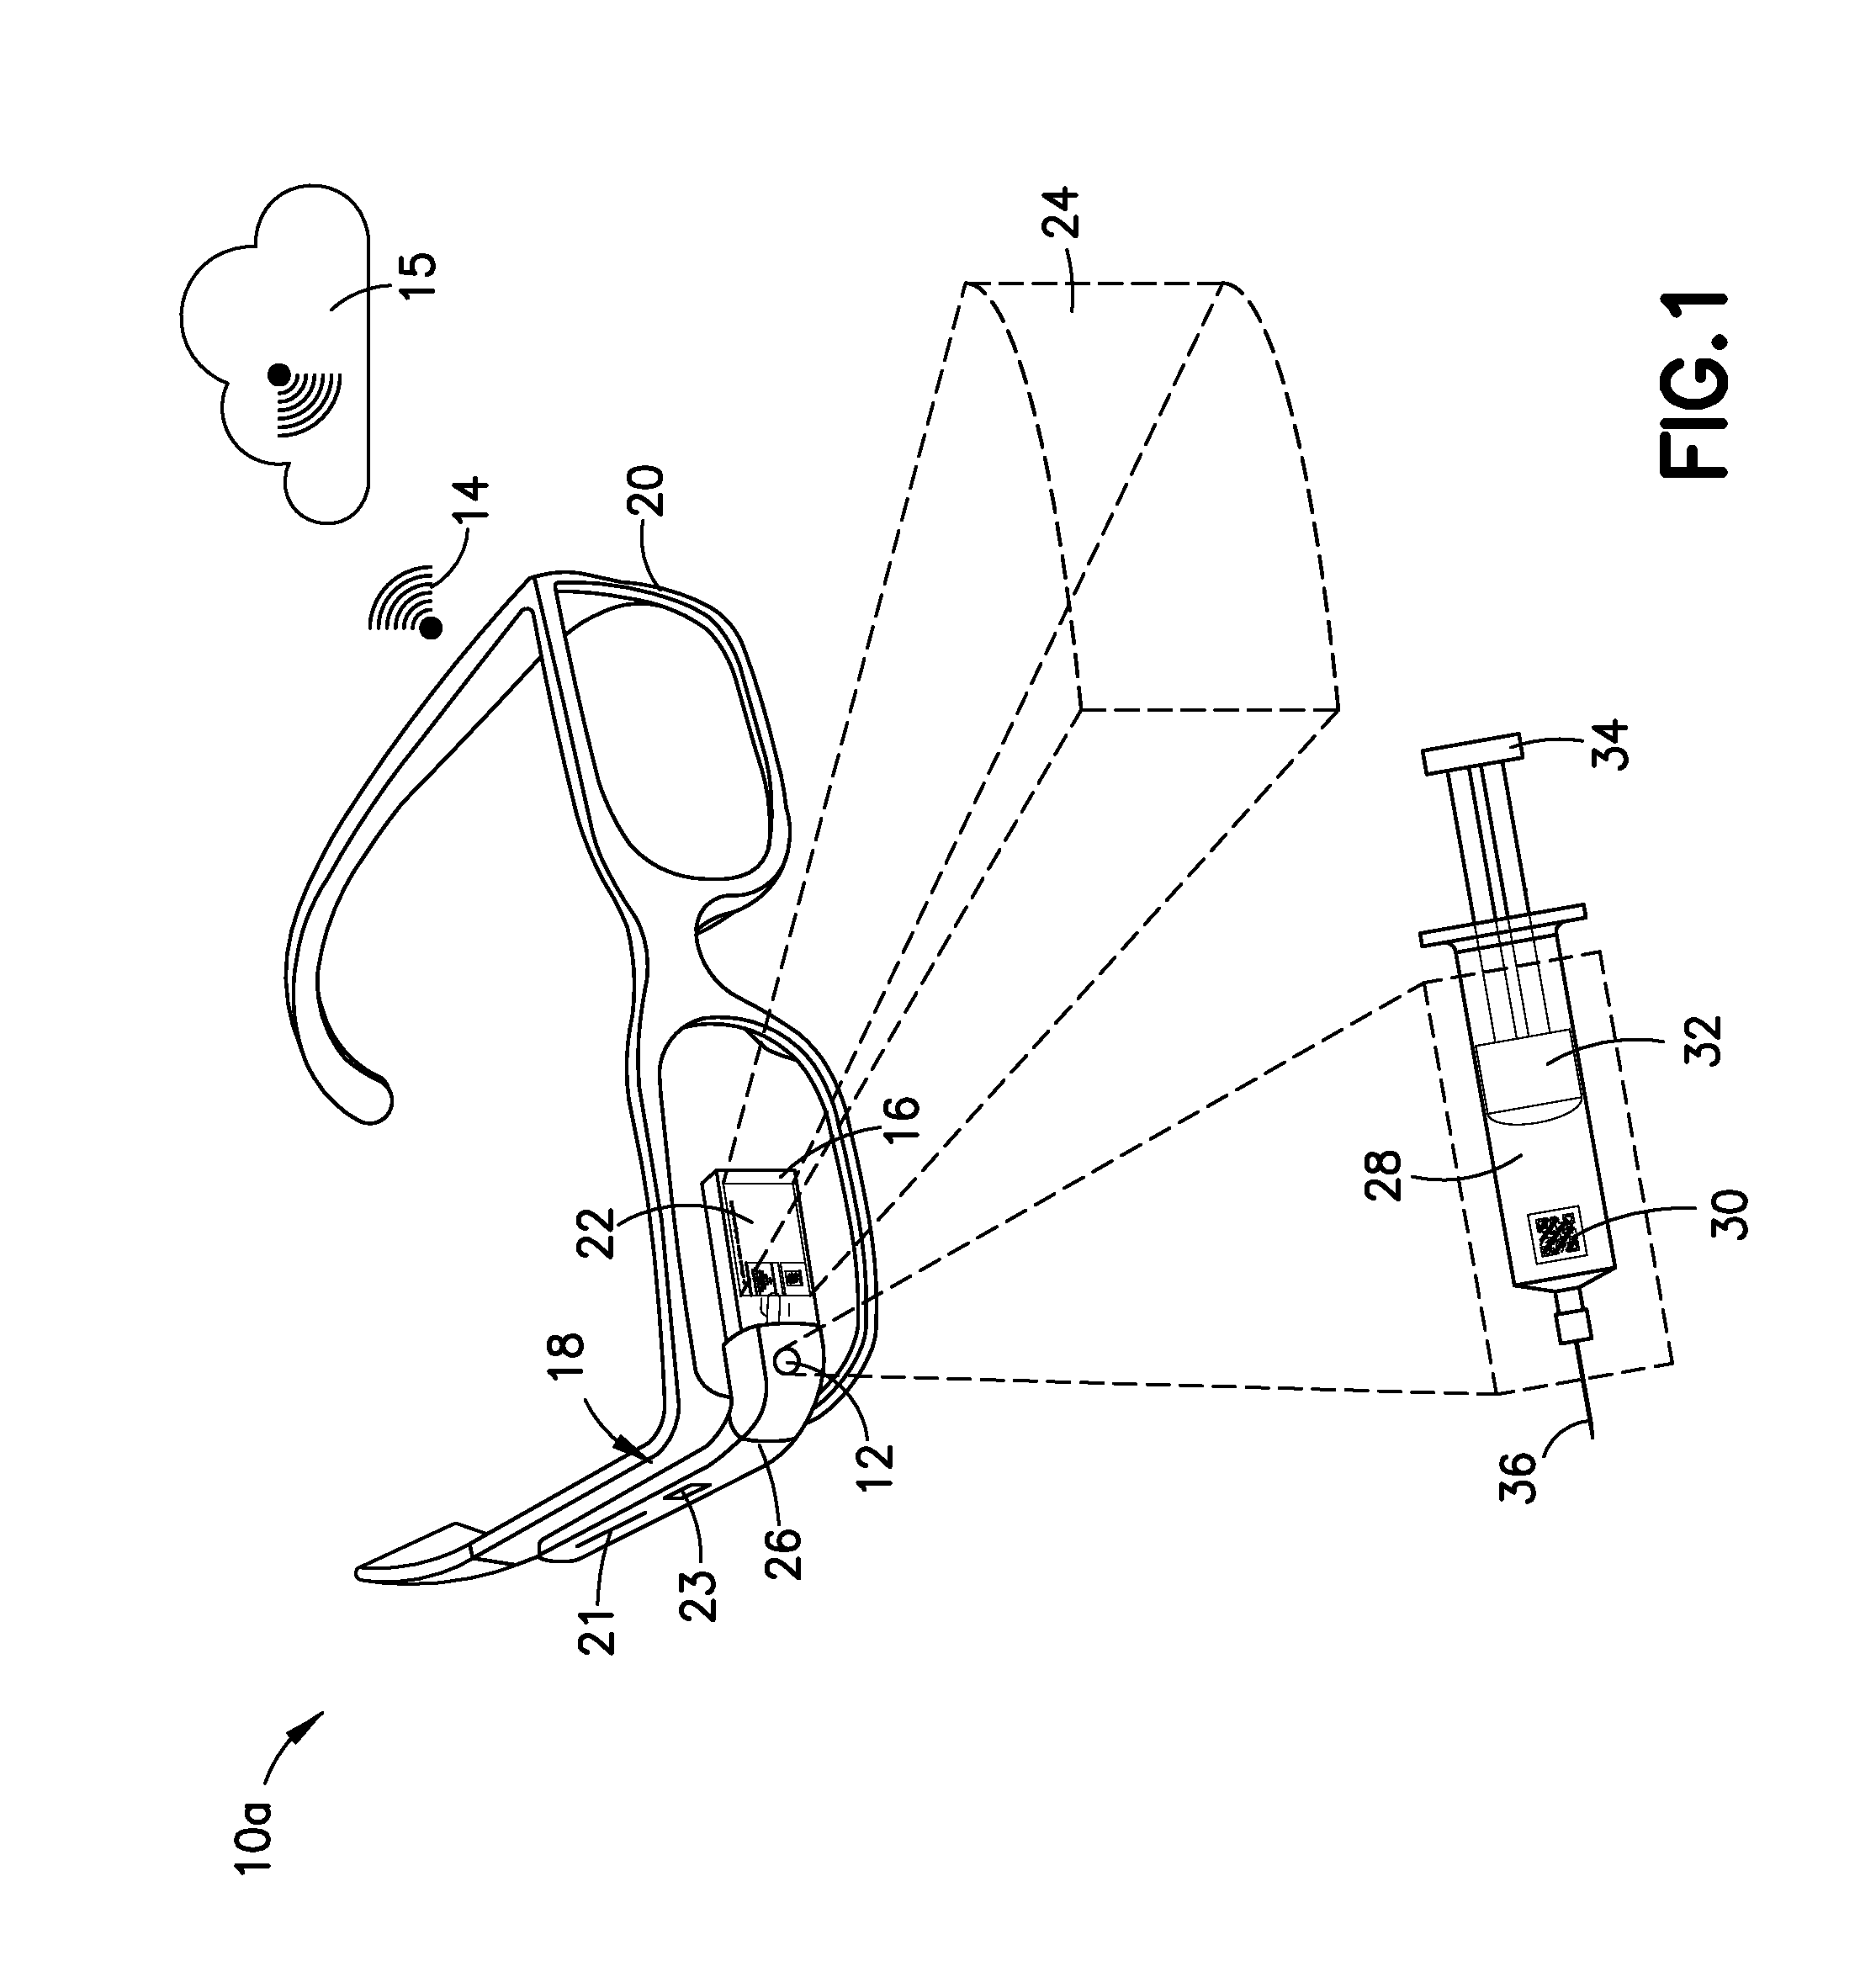 System and Method for Assuring Patient Medication and Fluid Delivery at the Clinical Point of Use